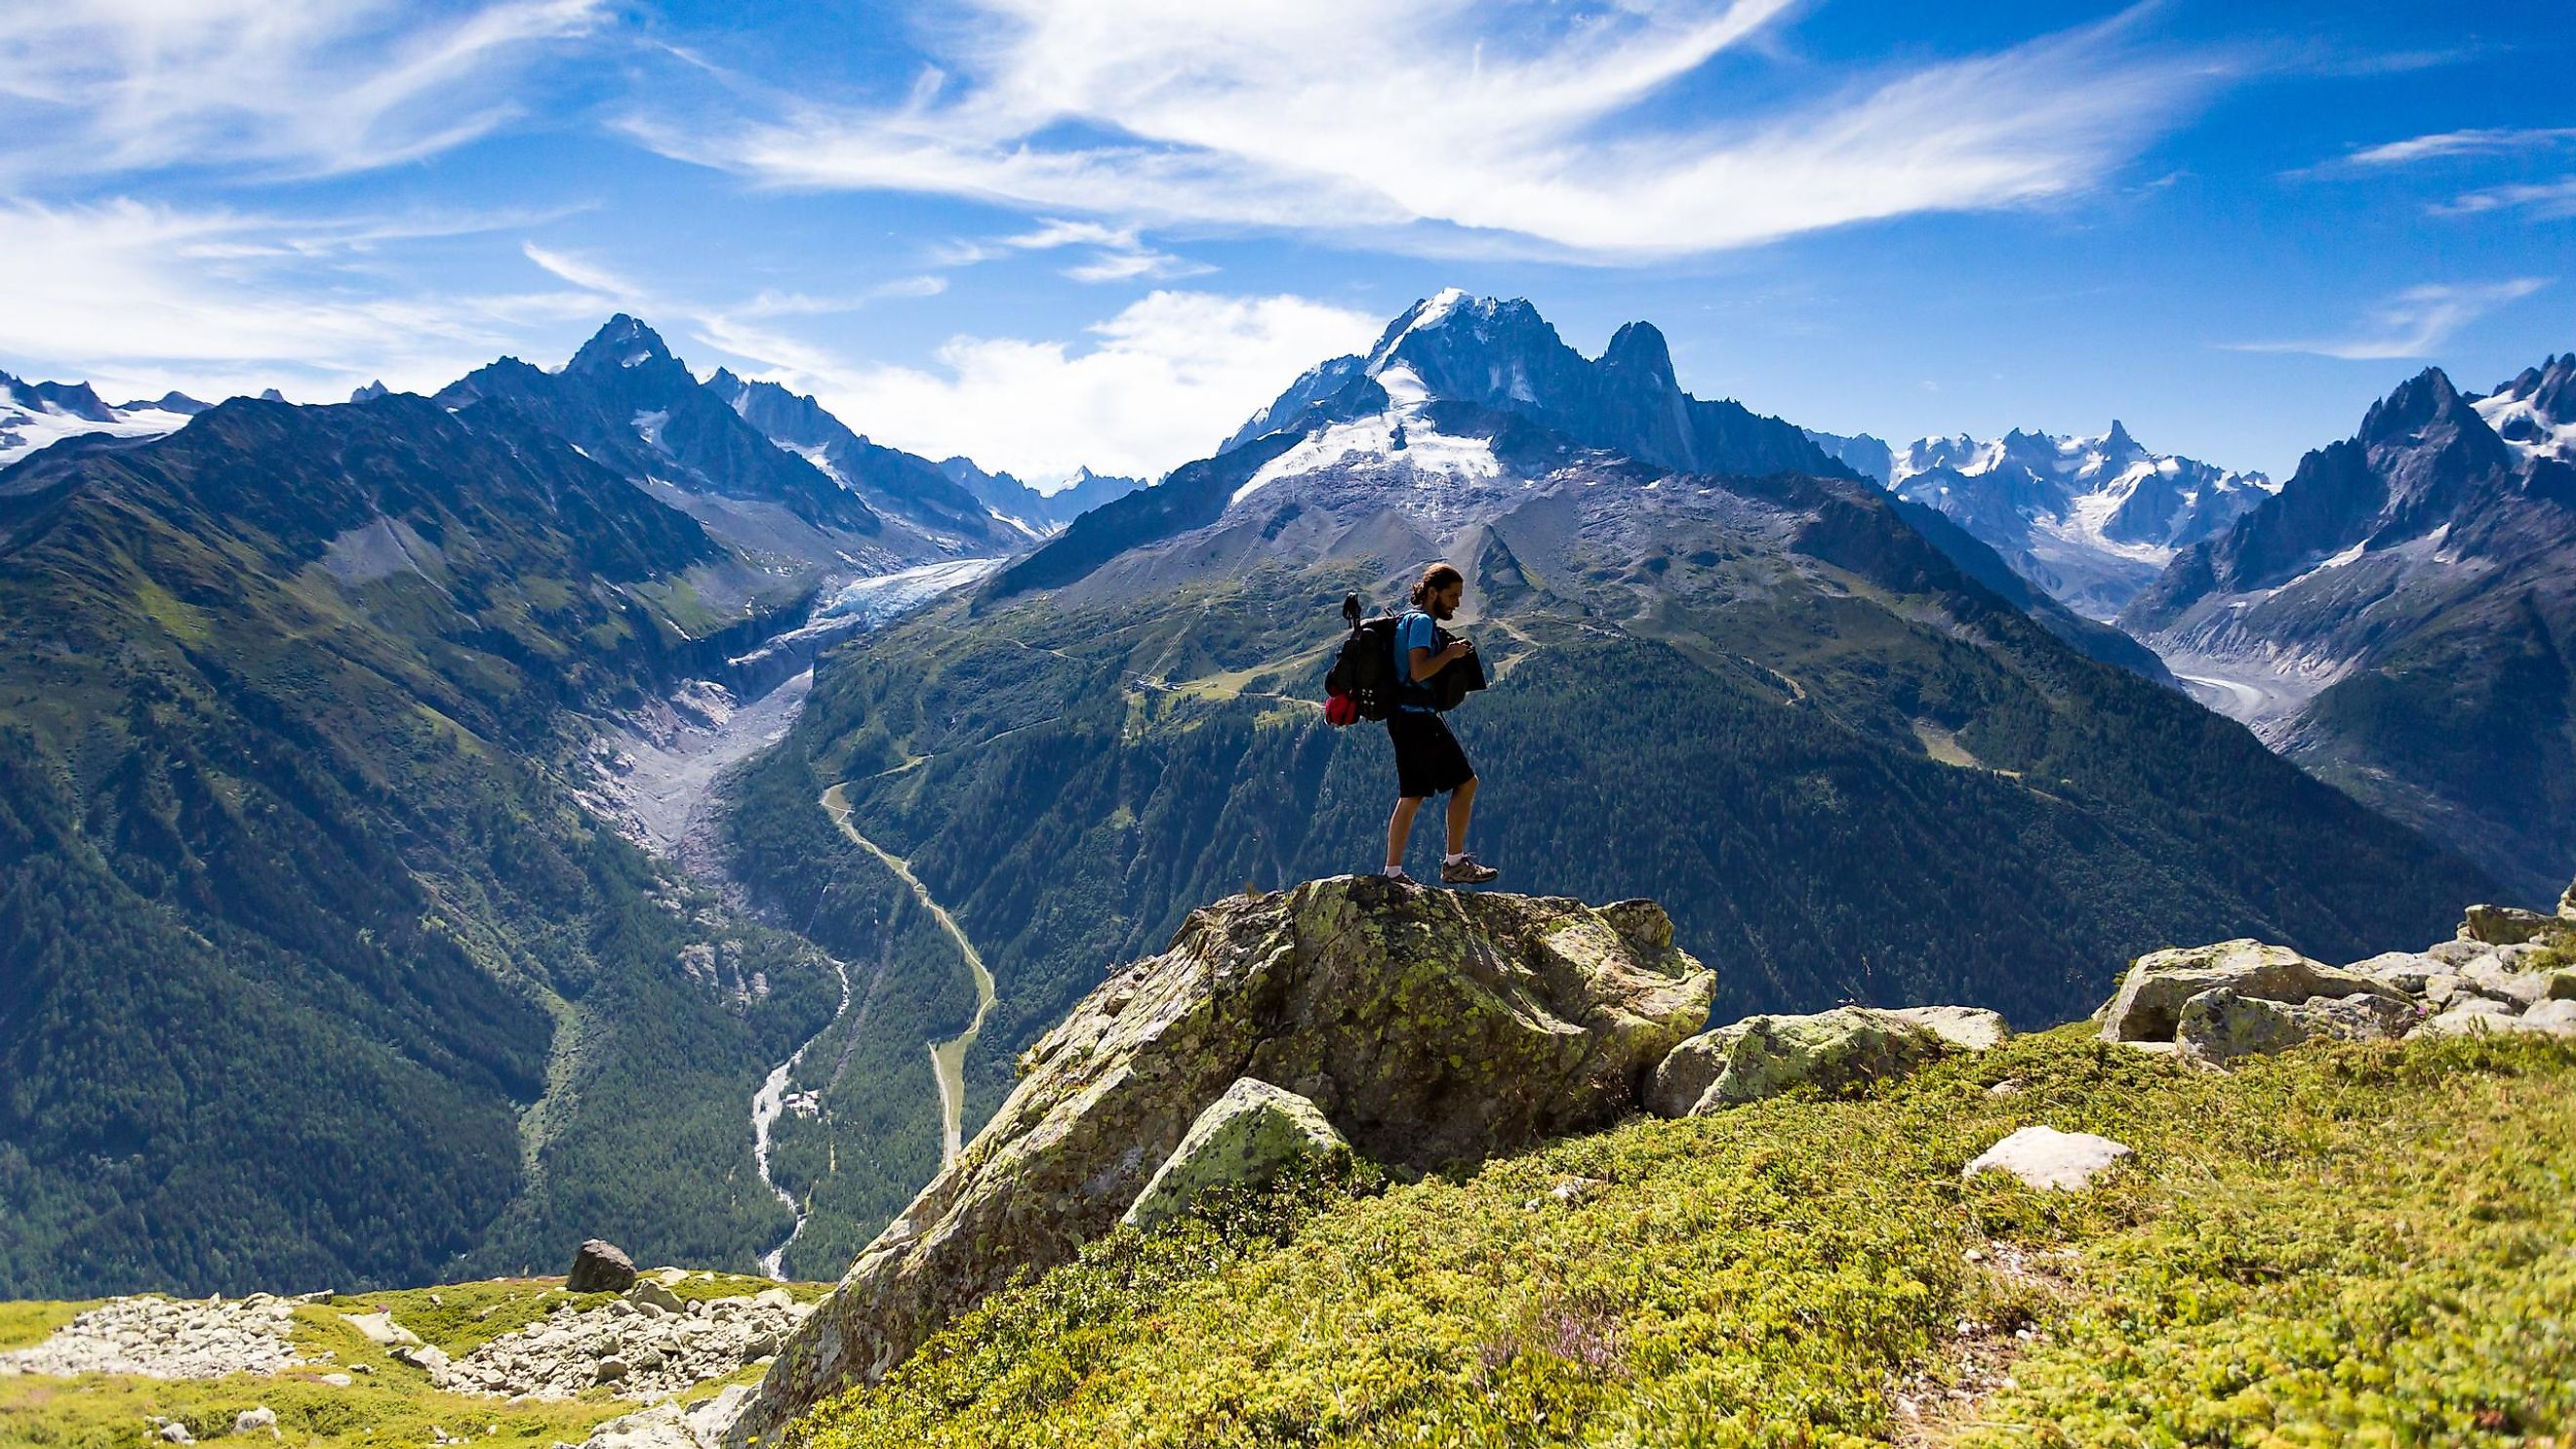 A hiker on the famous and gorgeous Tour du Mont Blanc hiking trail.